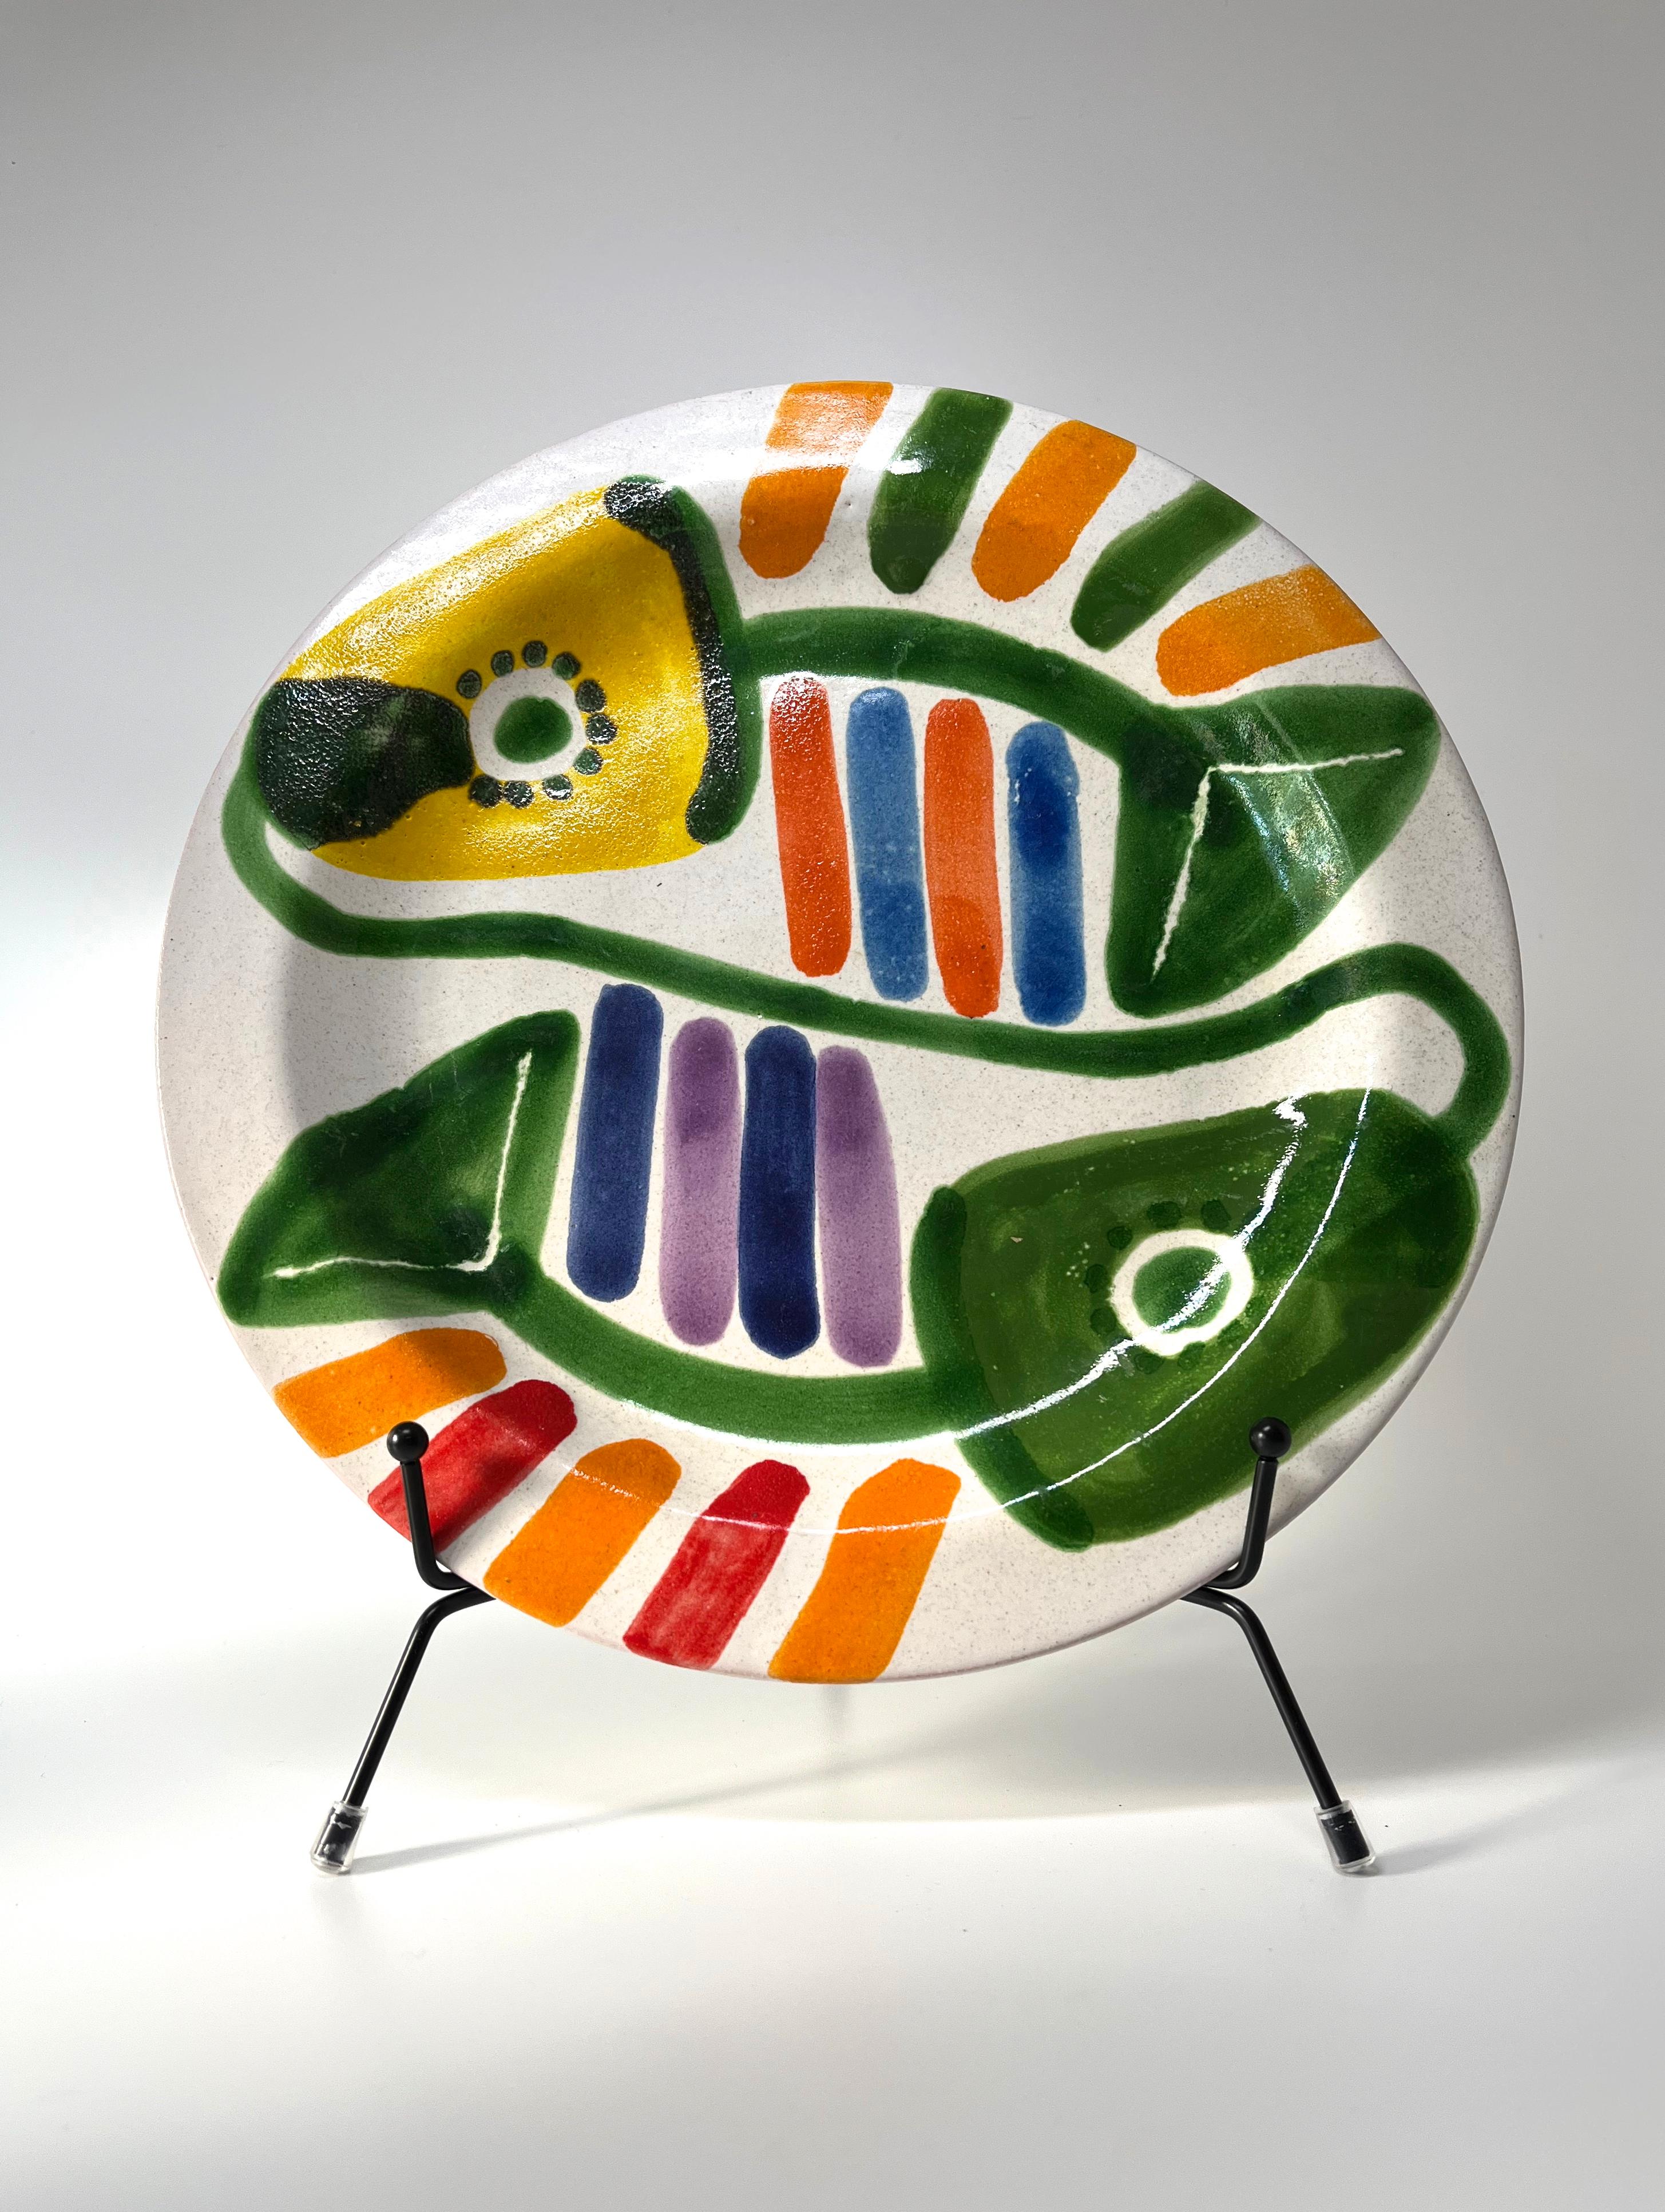 Bold and so colourful large mid-century ceramic plate by DeSimone, Italy
Hand painted Yin and Yang stylised fish dominate this entire piece
Circa 1960's
Signed DeSimone, Italy
Height 1 inch, Diameter 10 inch
In excellent condition
Wear consistent